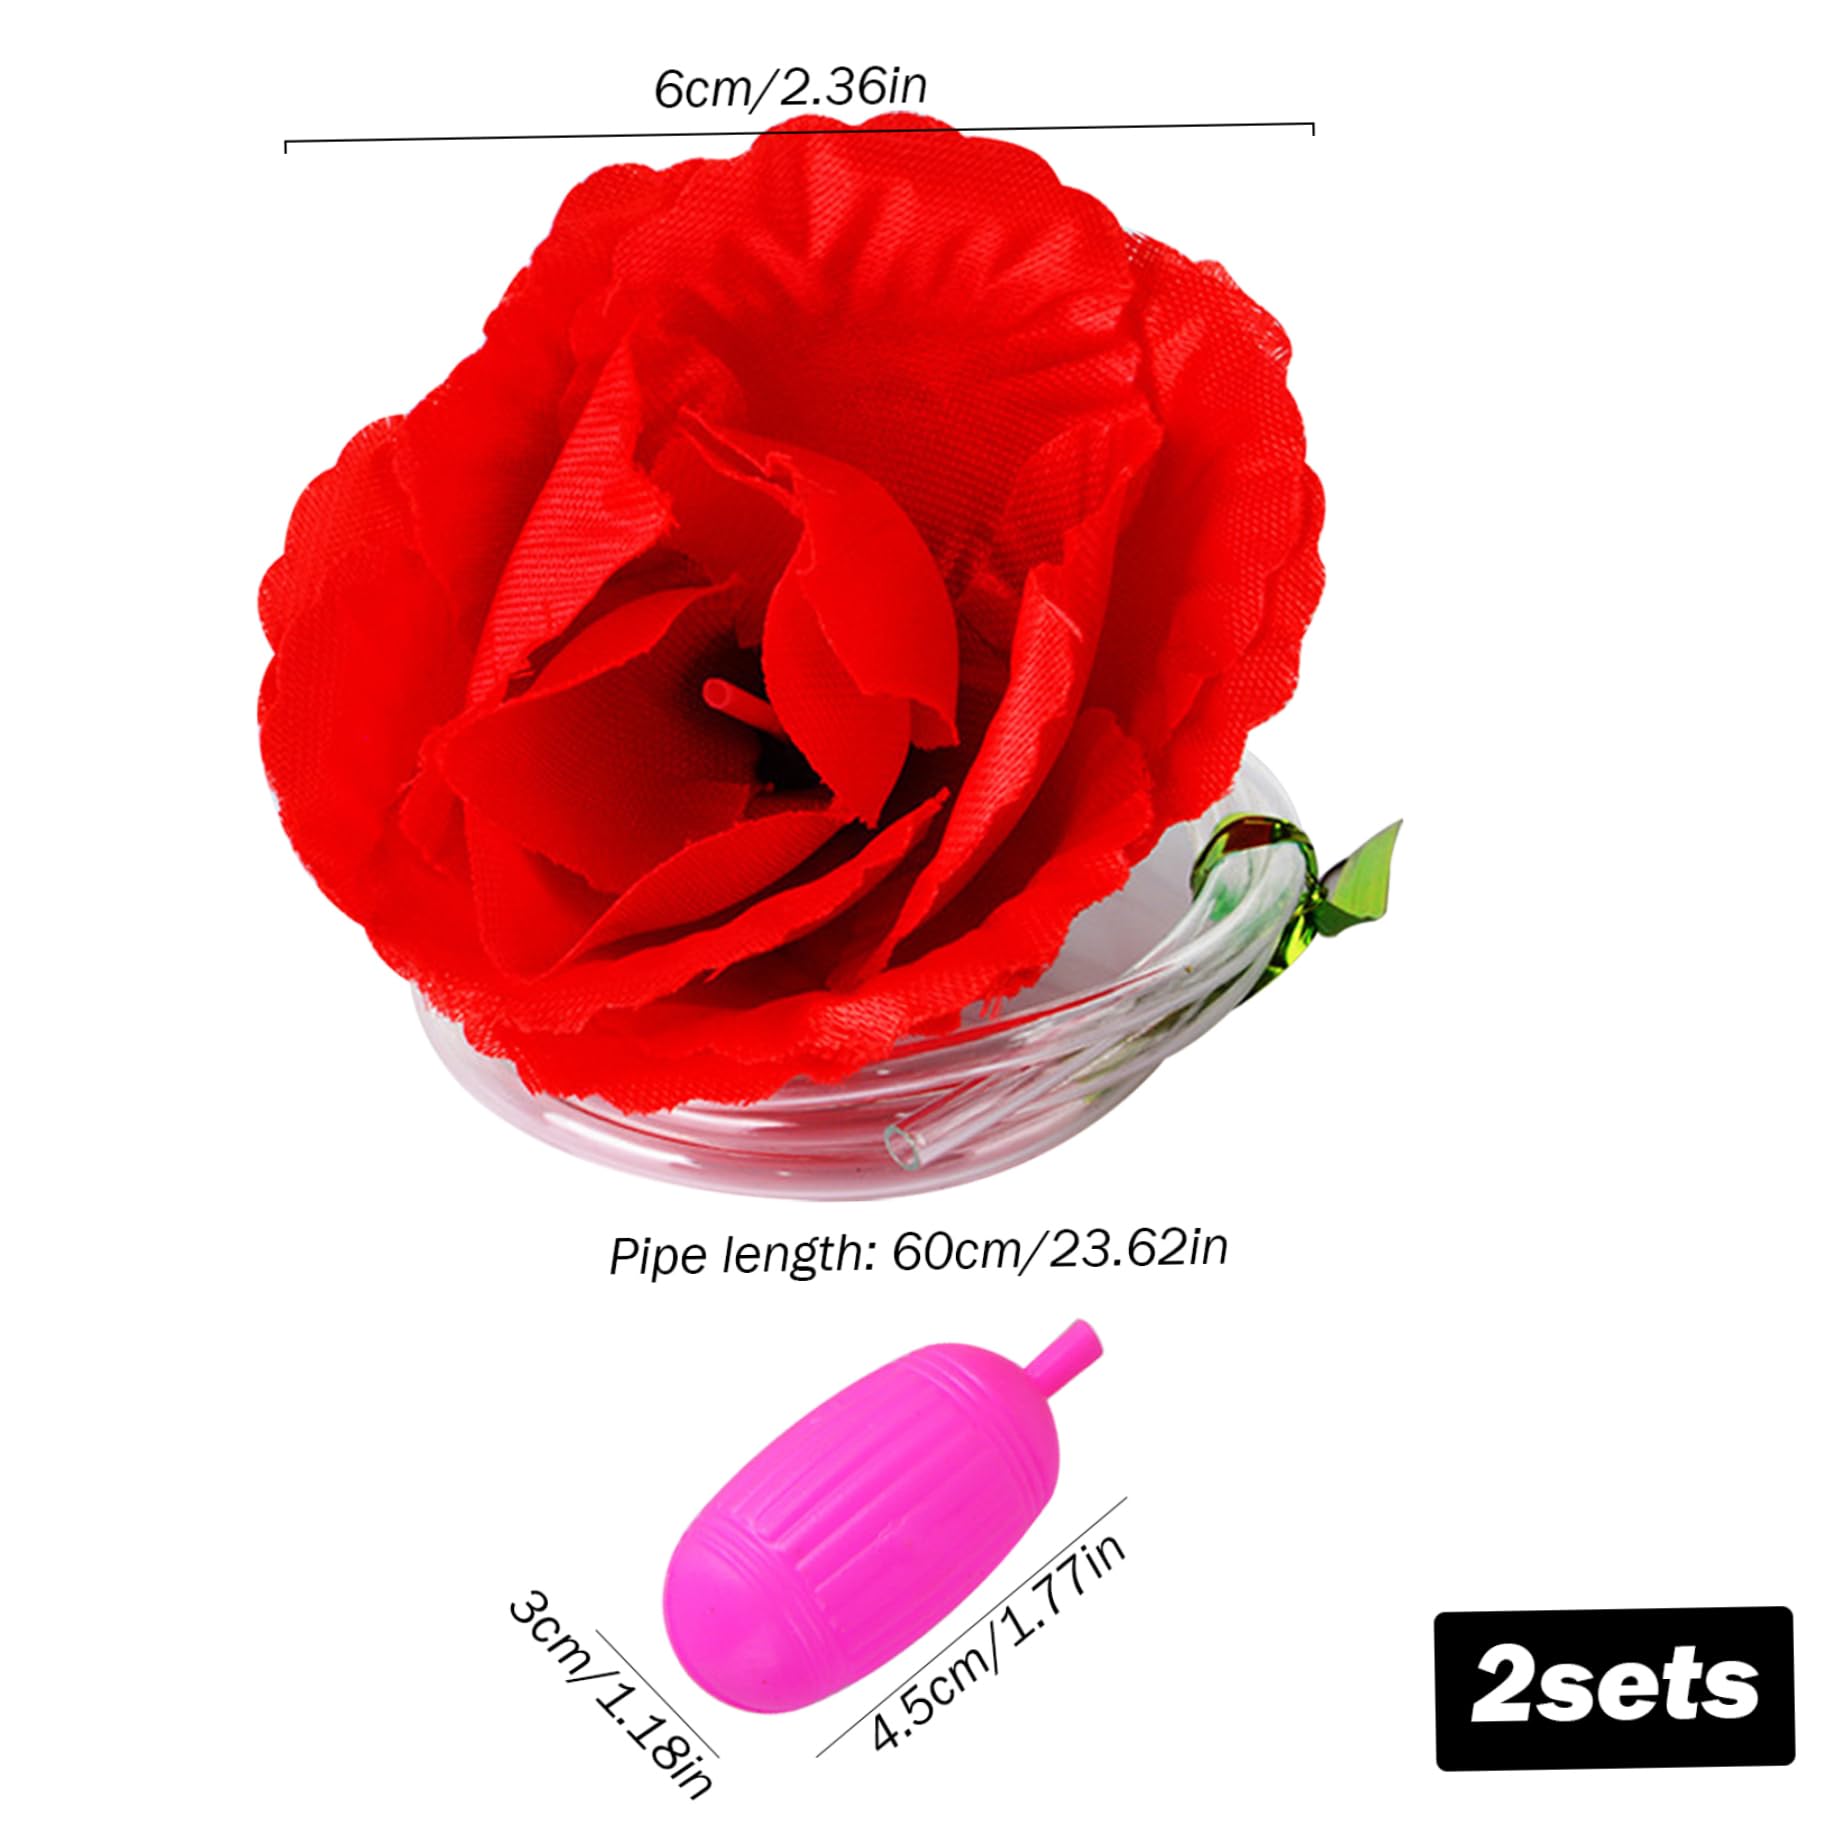 nicylin Squirting Flower Red Rose 2 Sets April Fools Day Pranks Clown Flower That Squirts Water Trick Toy Realistic Rose Flower Joke for Party Squirting Flowers